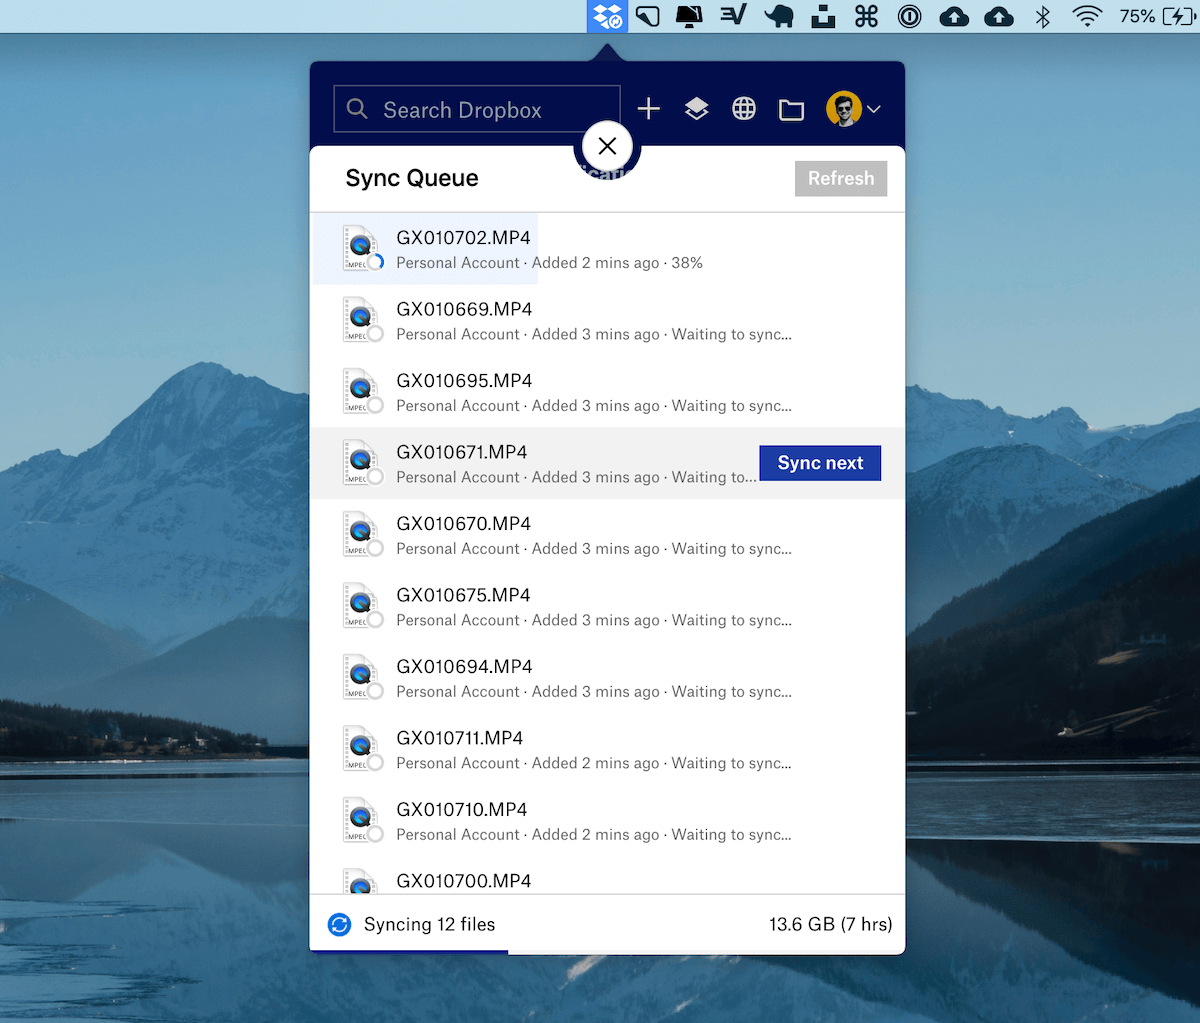 Choosing what to sync next in the Dropbox app.